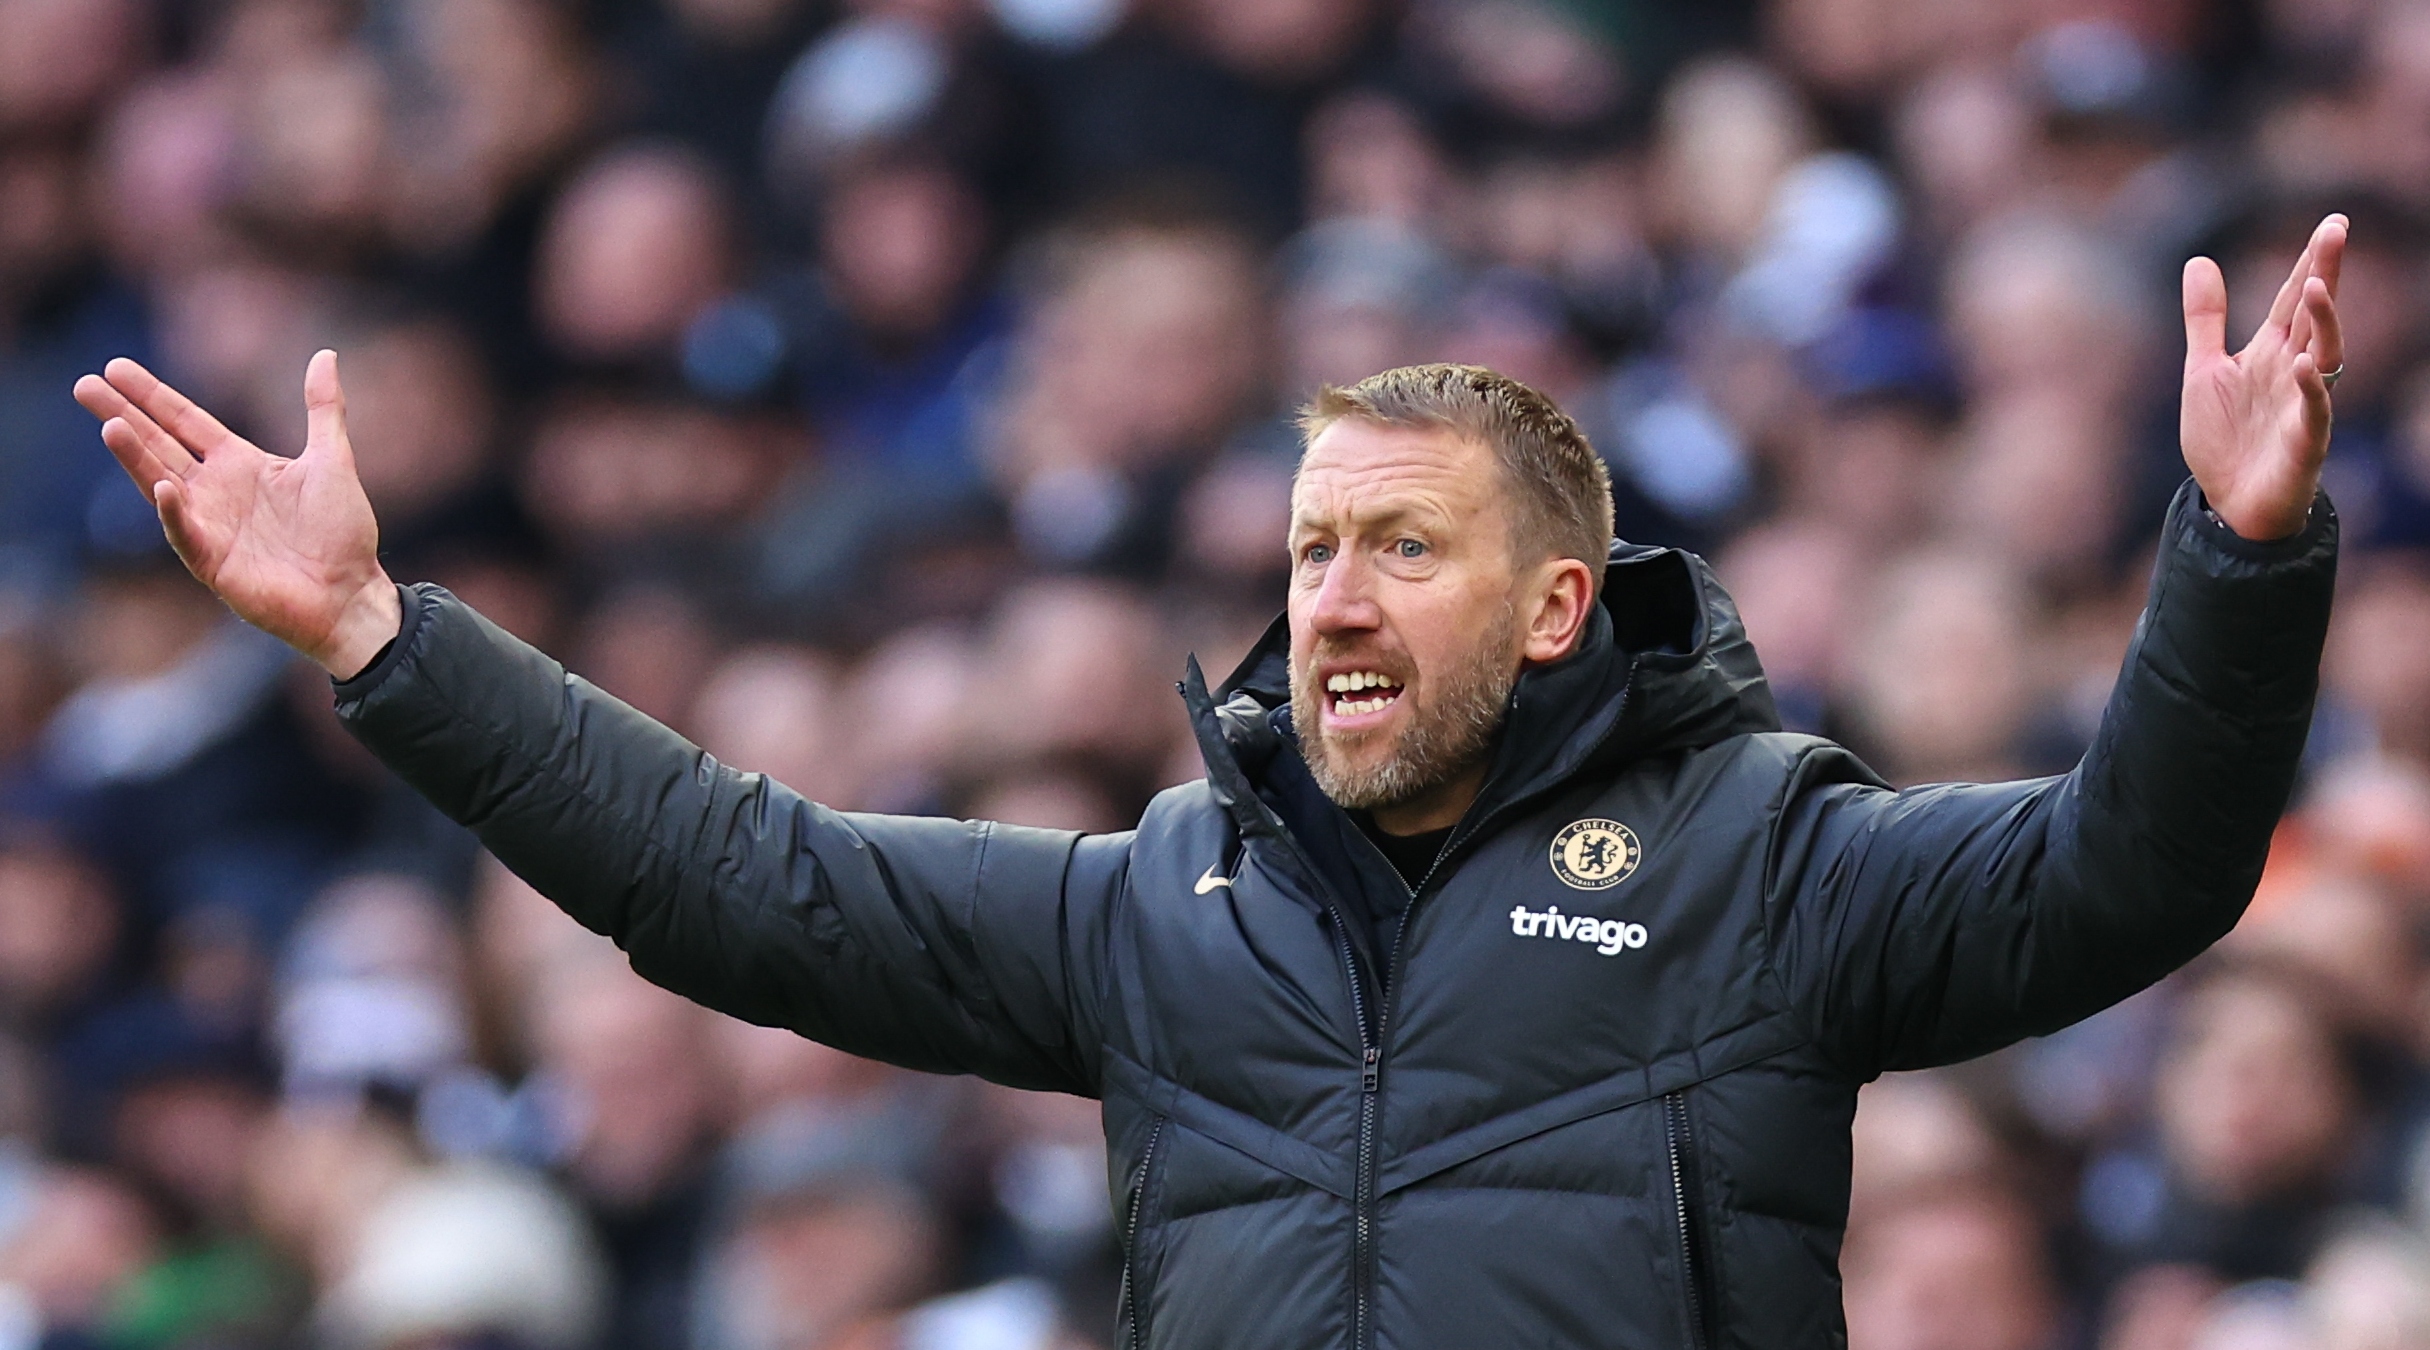 Chelsea head coach Graham Potter gestures during the Premier League match between Tottenham Hotspur and Chelsea at the Tottenham Hotspur Stadium on 26 February, 2023 in London, United Kingdom.